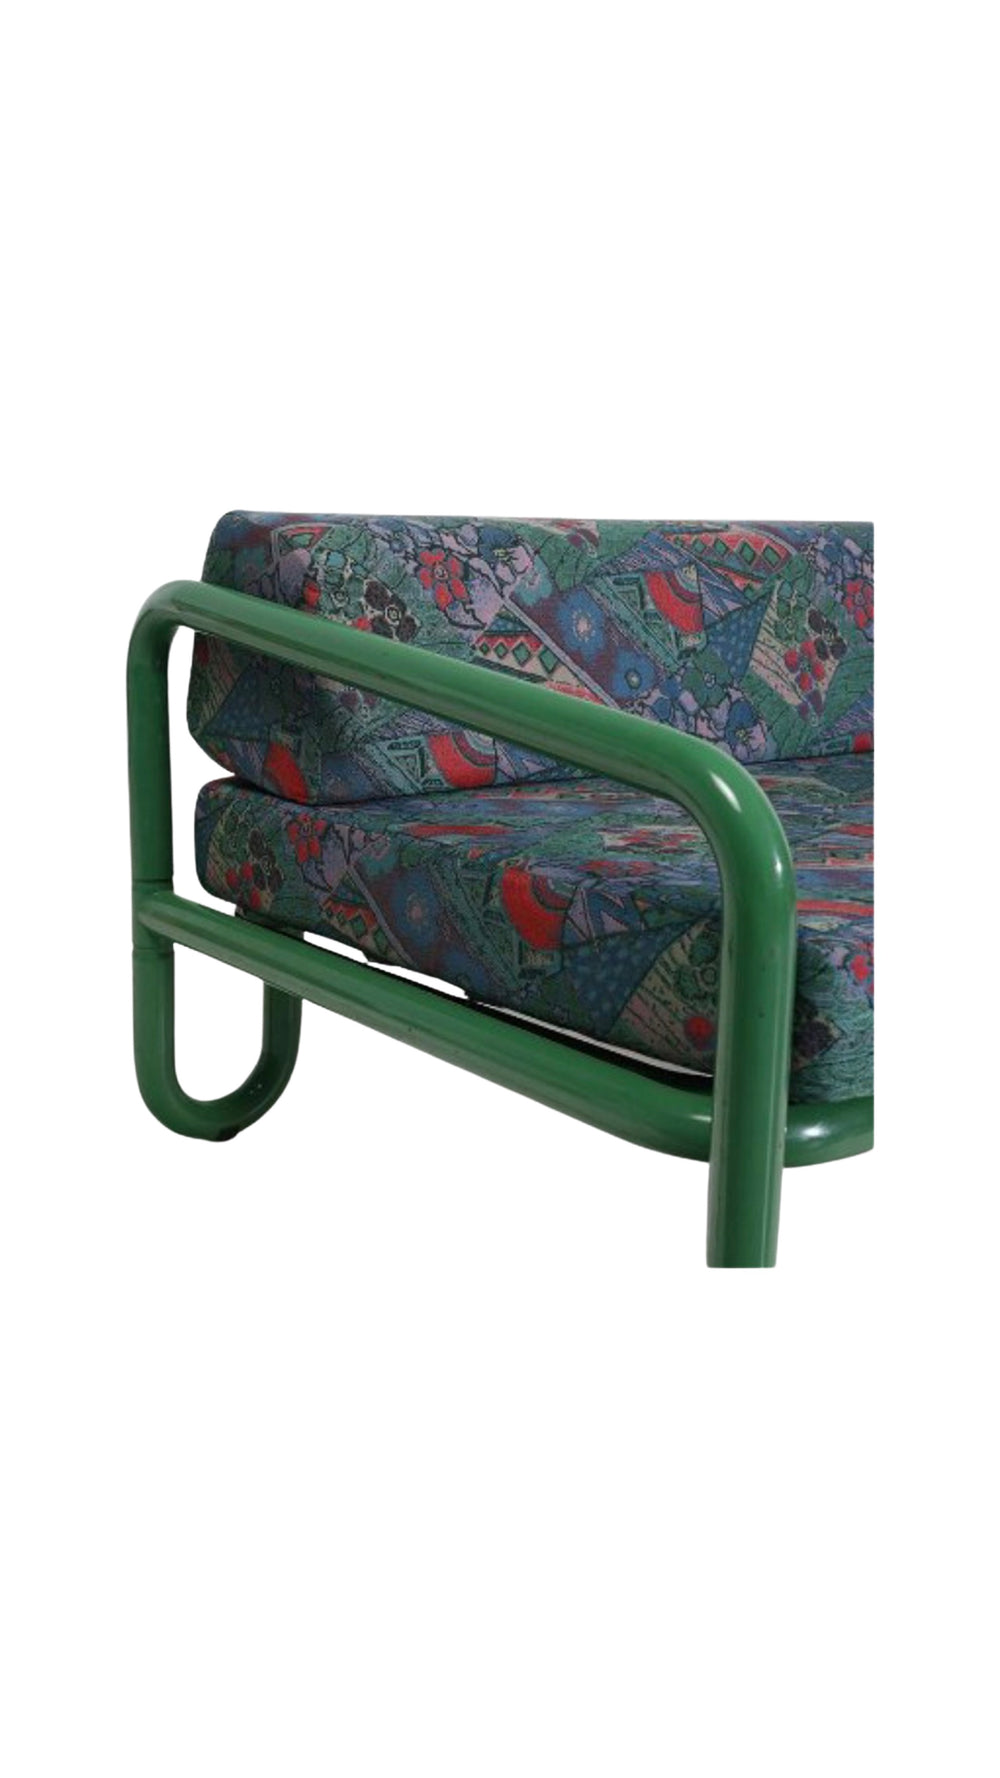 Italian green metal daybed sofa in the style of Gae Aulenti, Italy, circa 1980s.